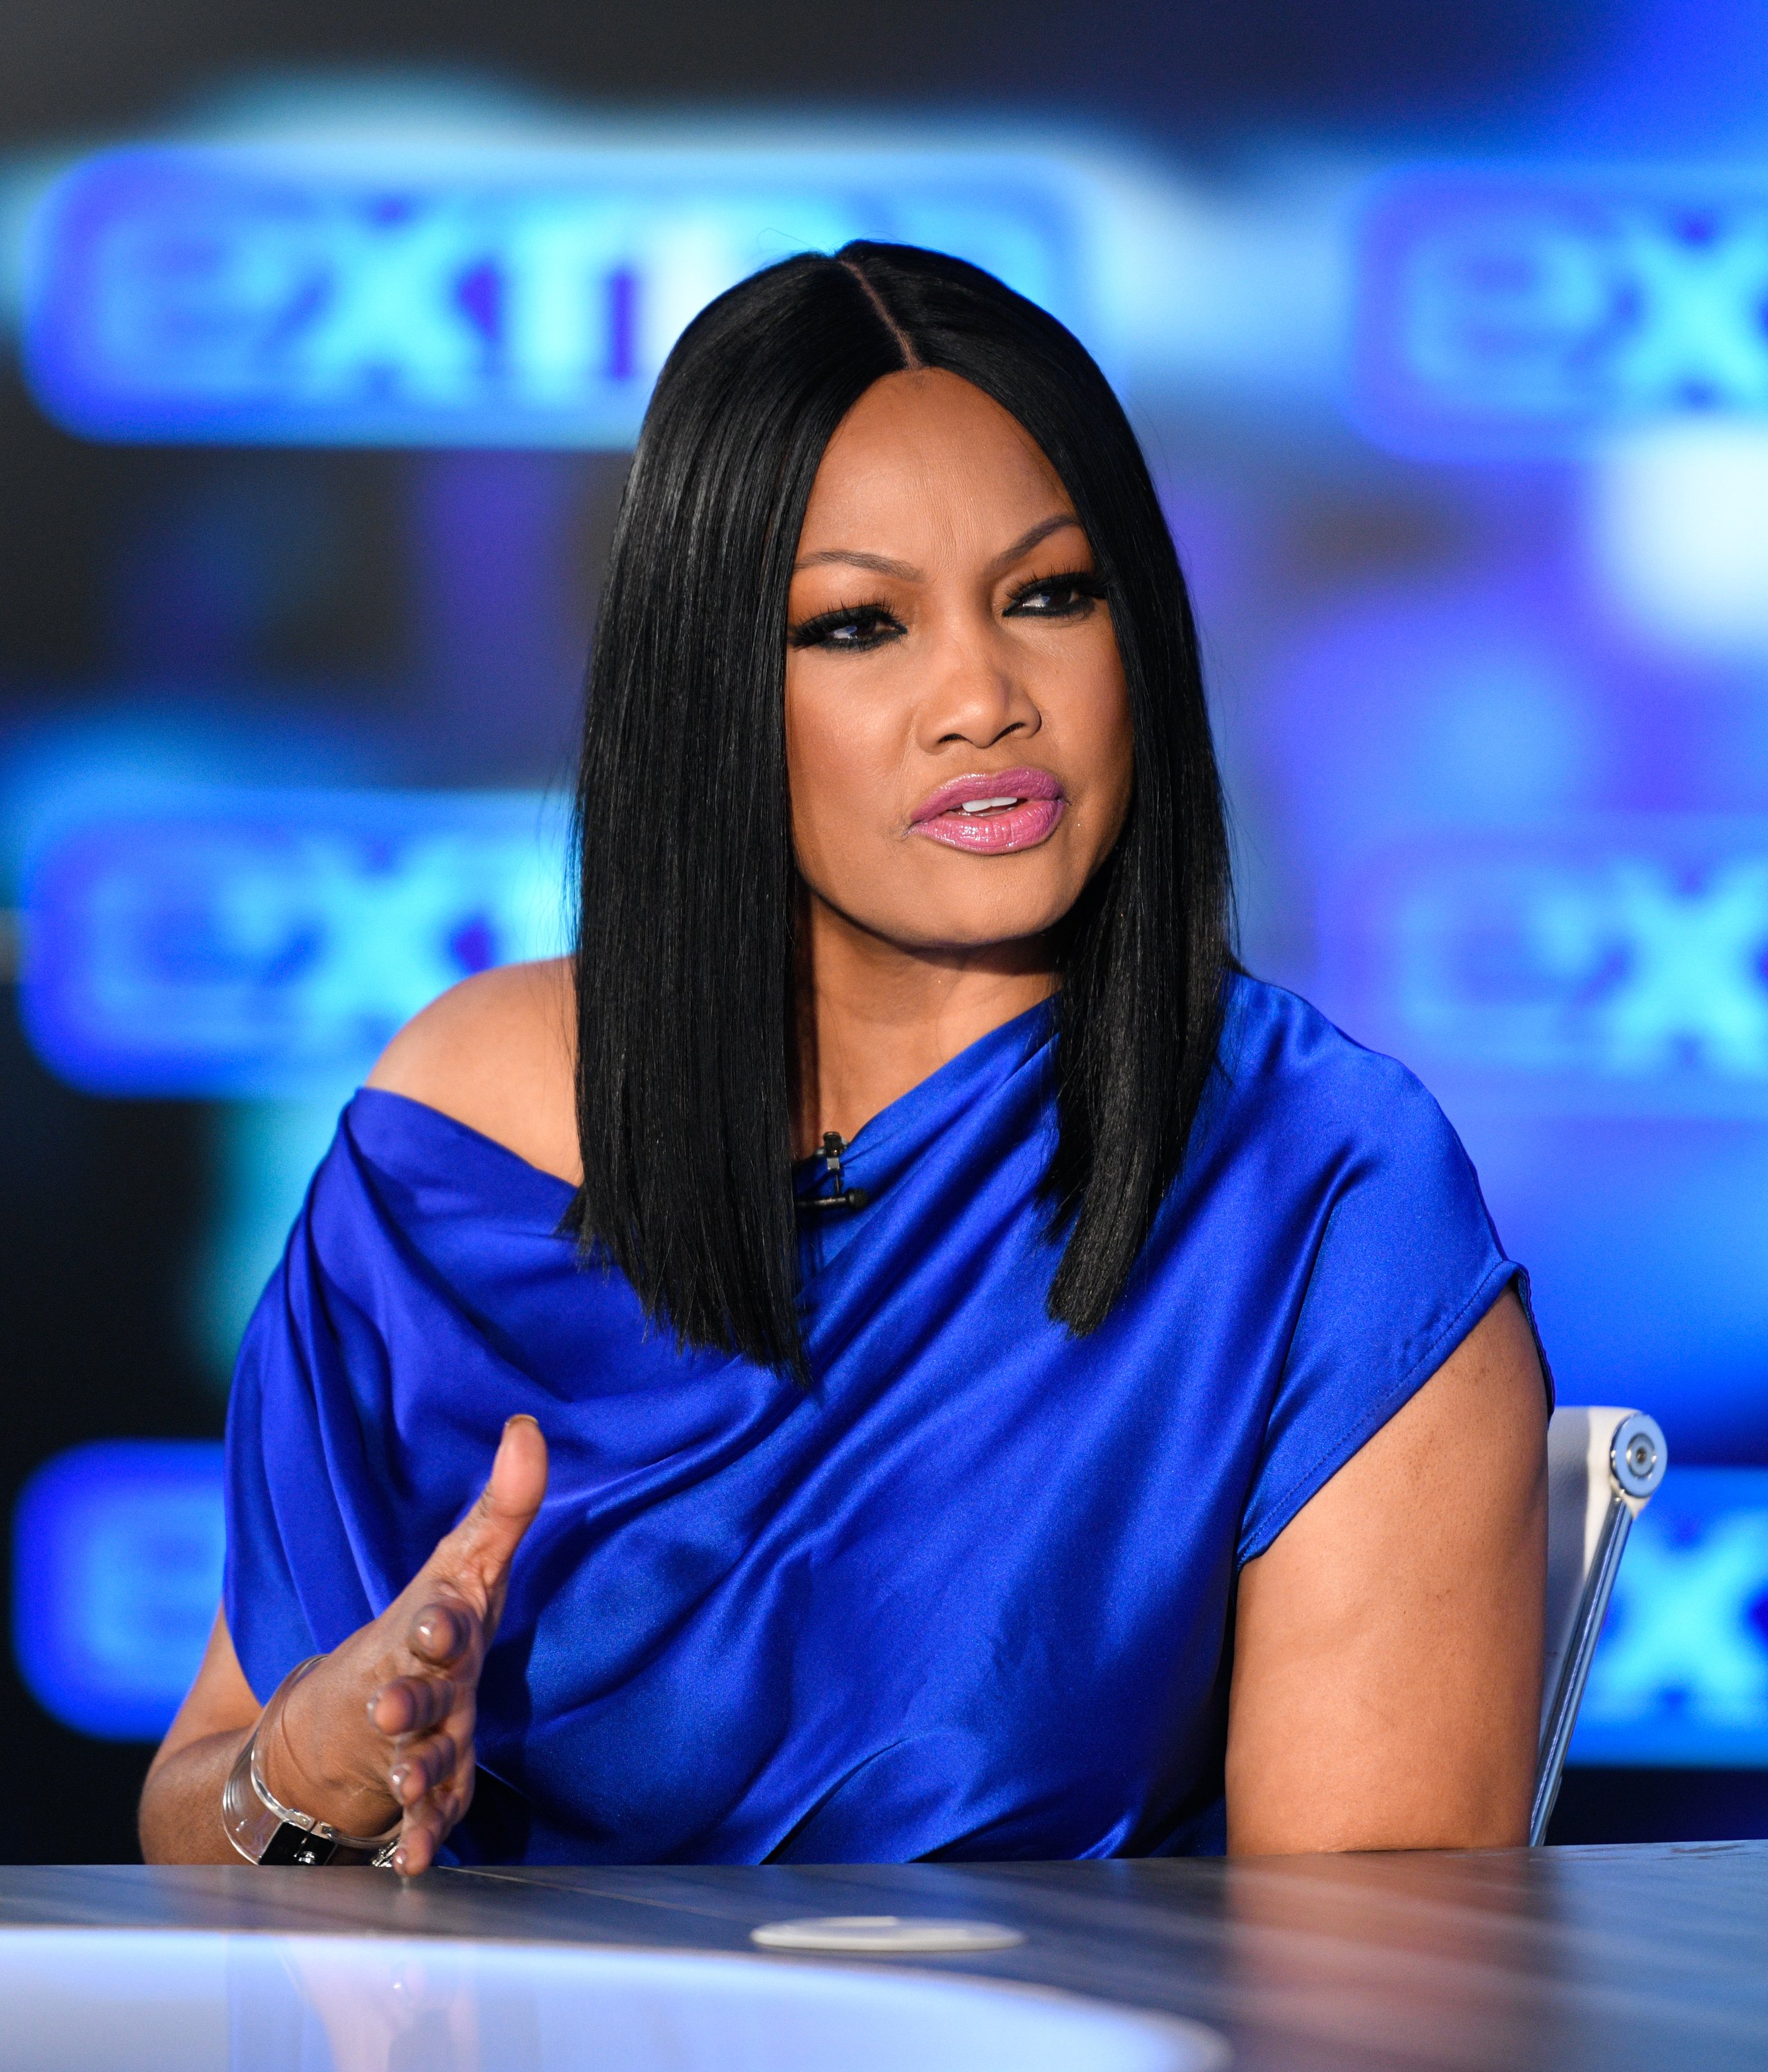 Garcelle Beauvais at "Extra" in Burbank Studios on November 26, 2019 in Burbank, California | Photo: Getty Images